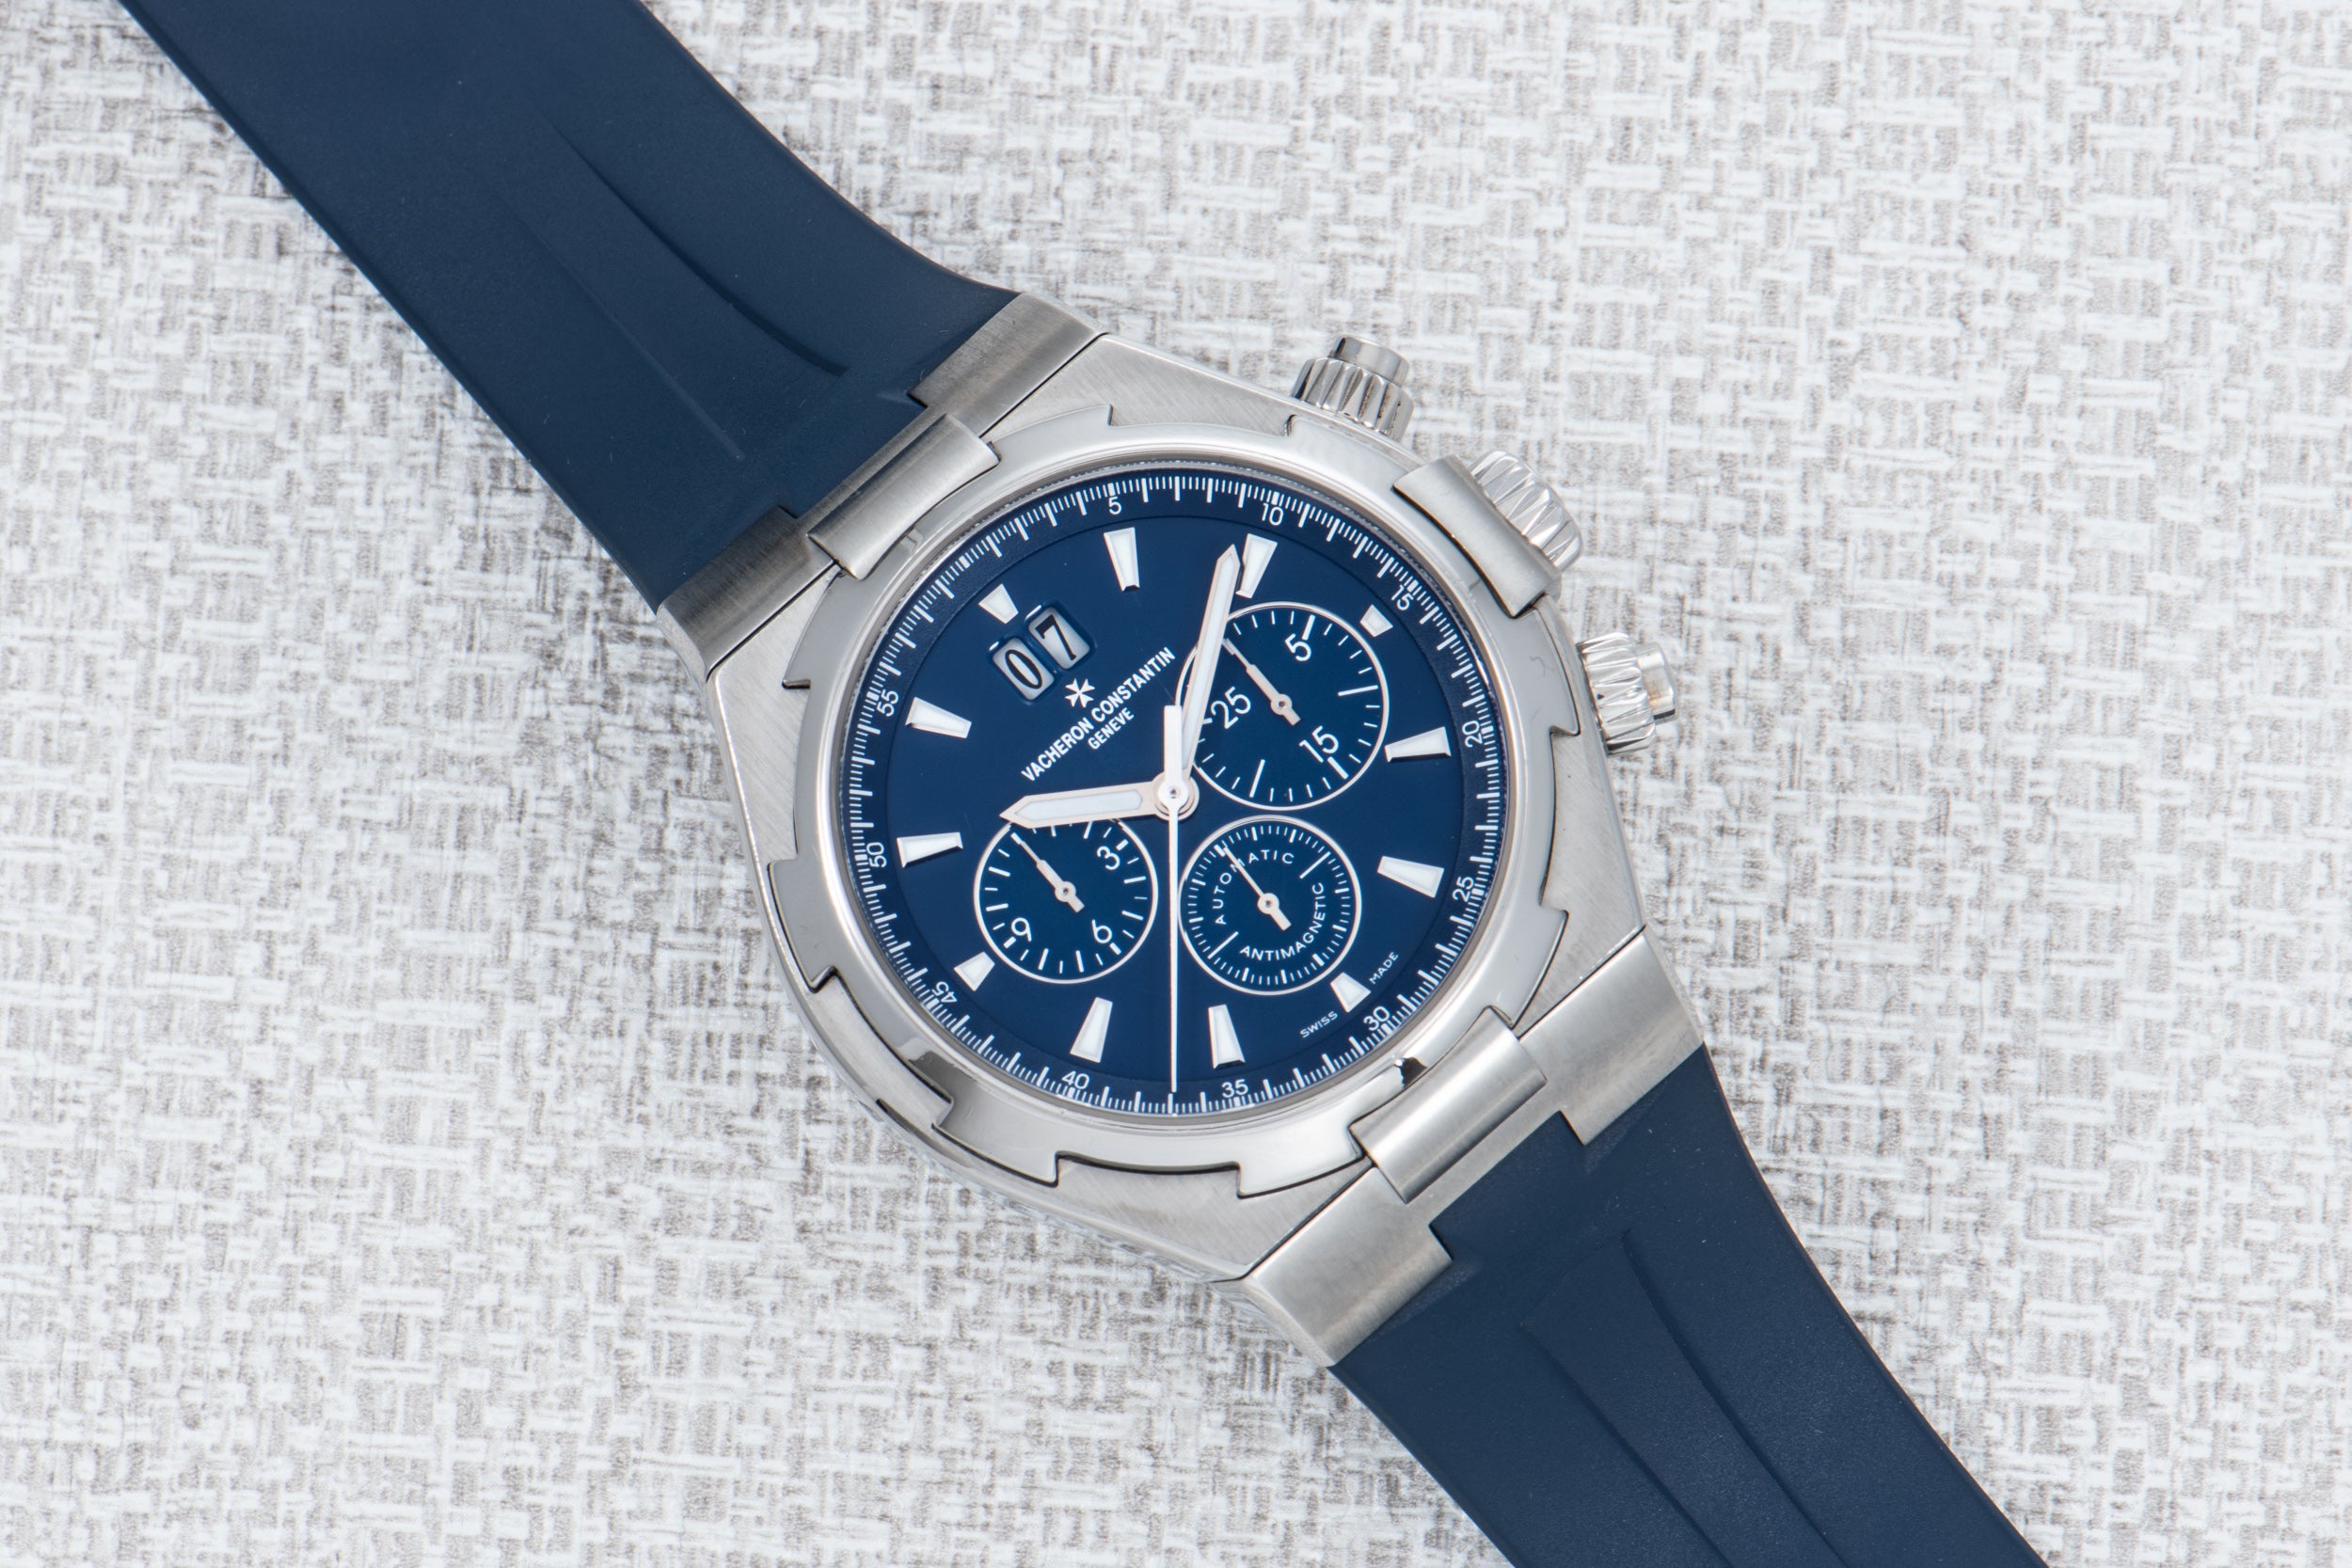 Vacheron Constantin Overseas Chronograph for £37,495 for sale from